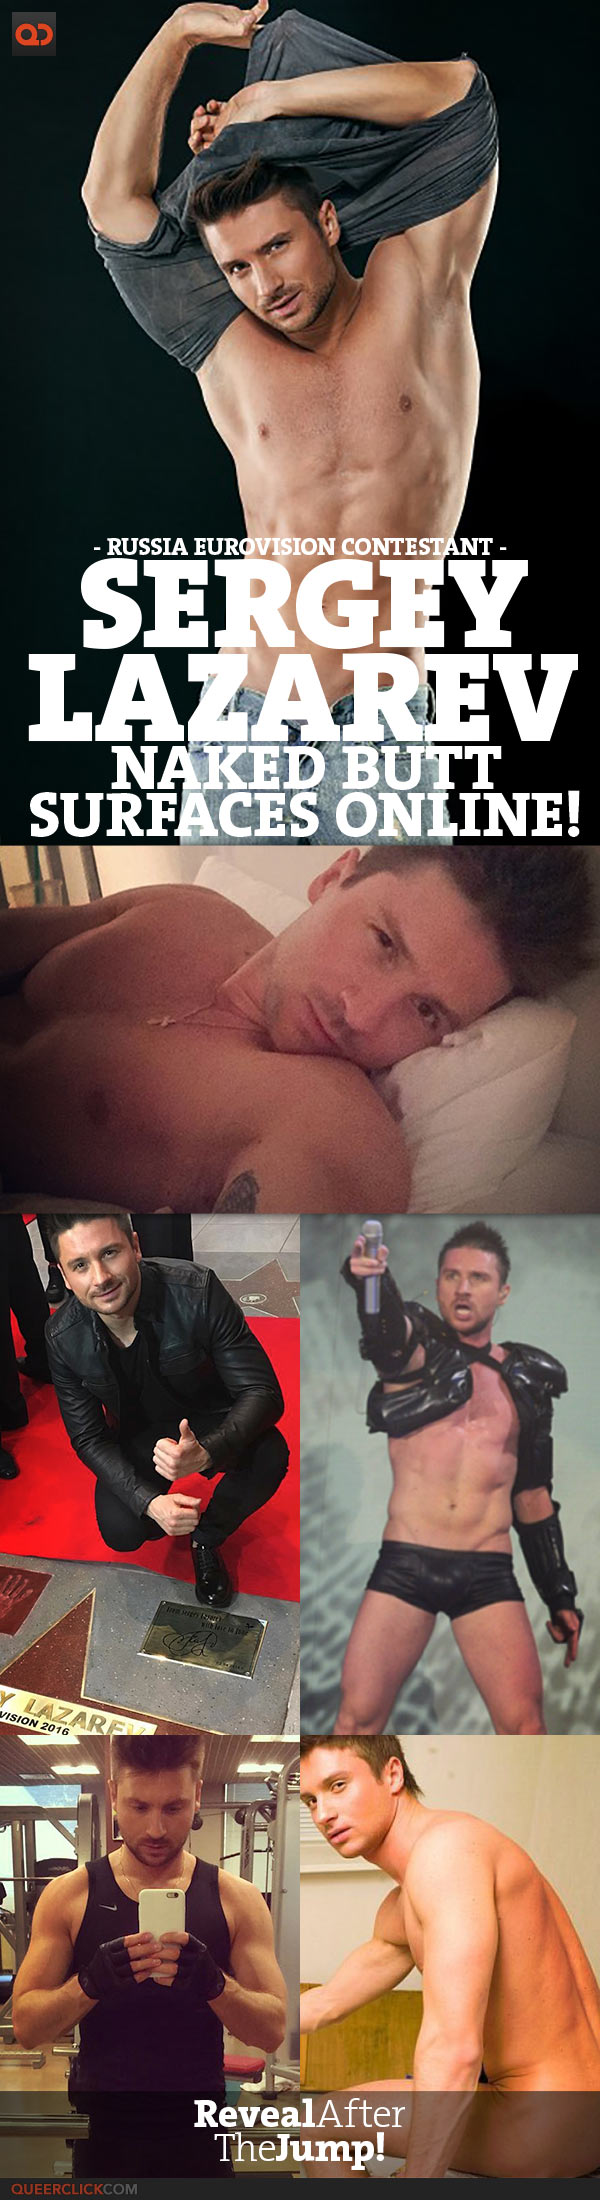 qc-exposed_sergey_lazarev_russia_eurovision_contestant_naked_butt_surfaces_online-teaser